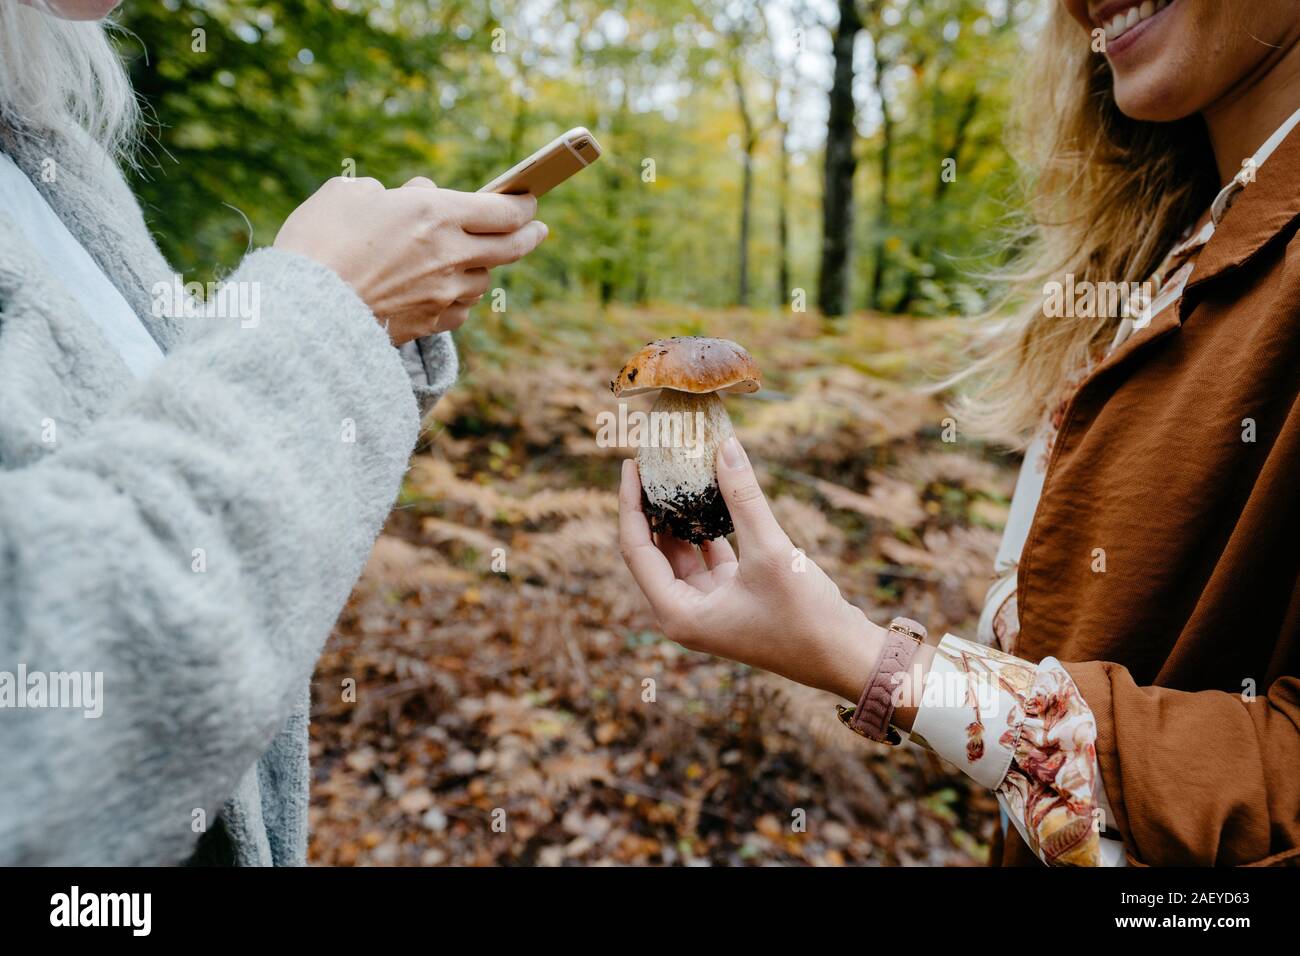 Young women taking snapshot of a porcini mushroom in a forest Stock Photo